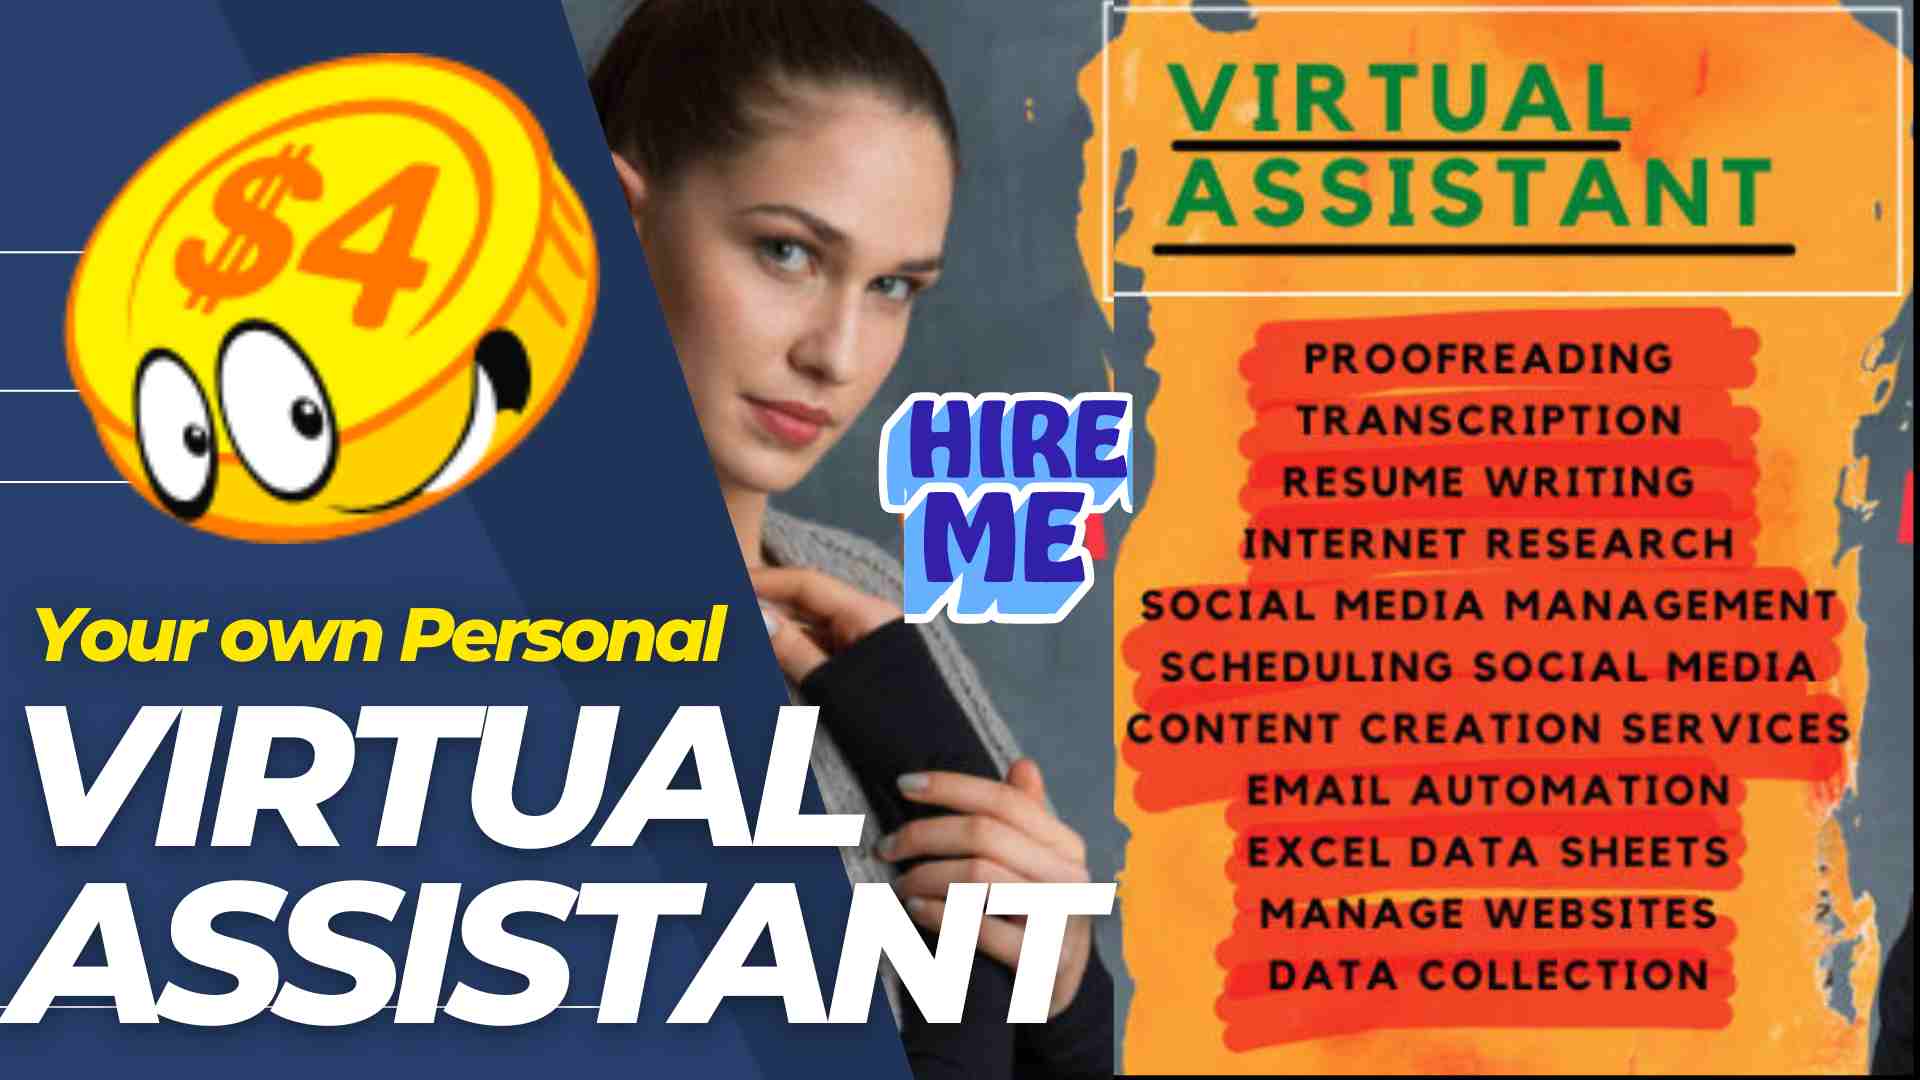 I will be your professional and experienced virtual assistant